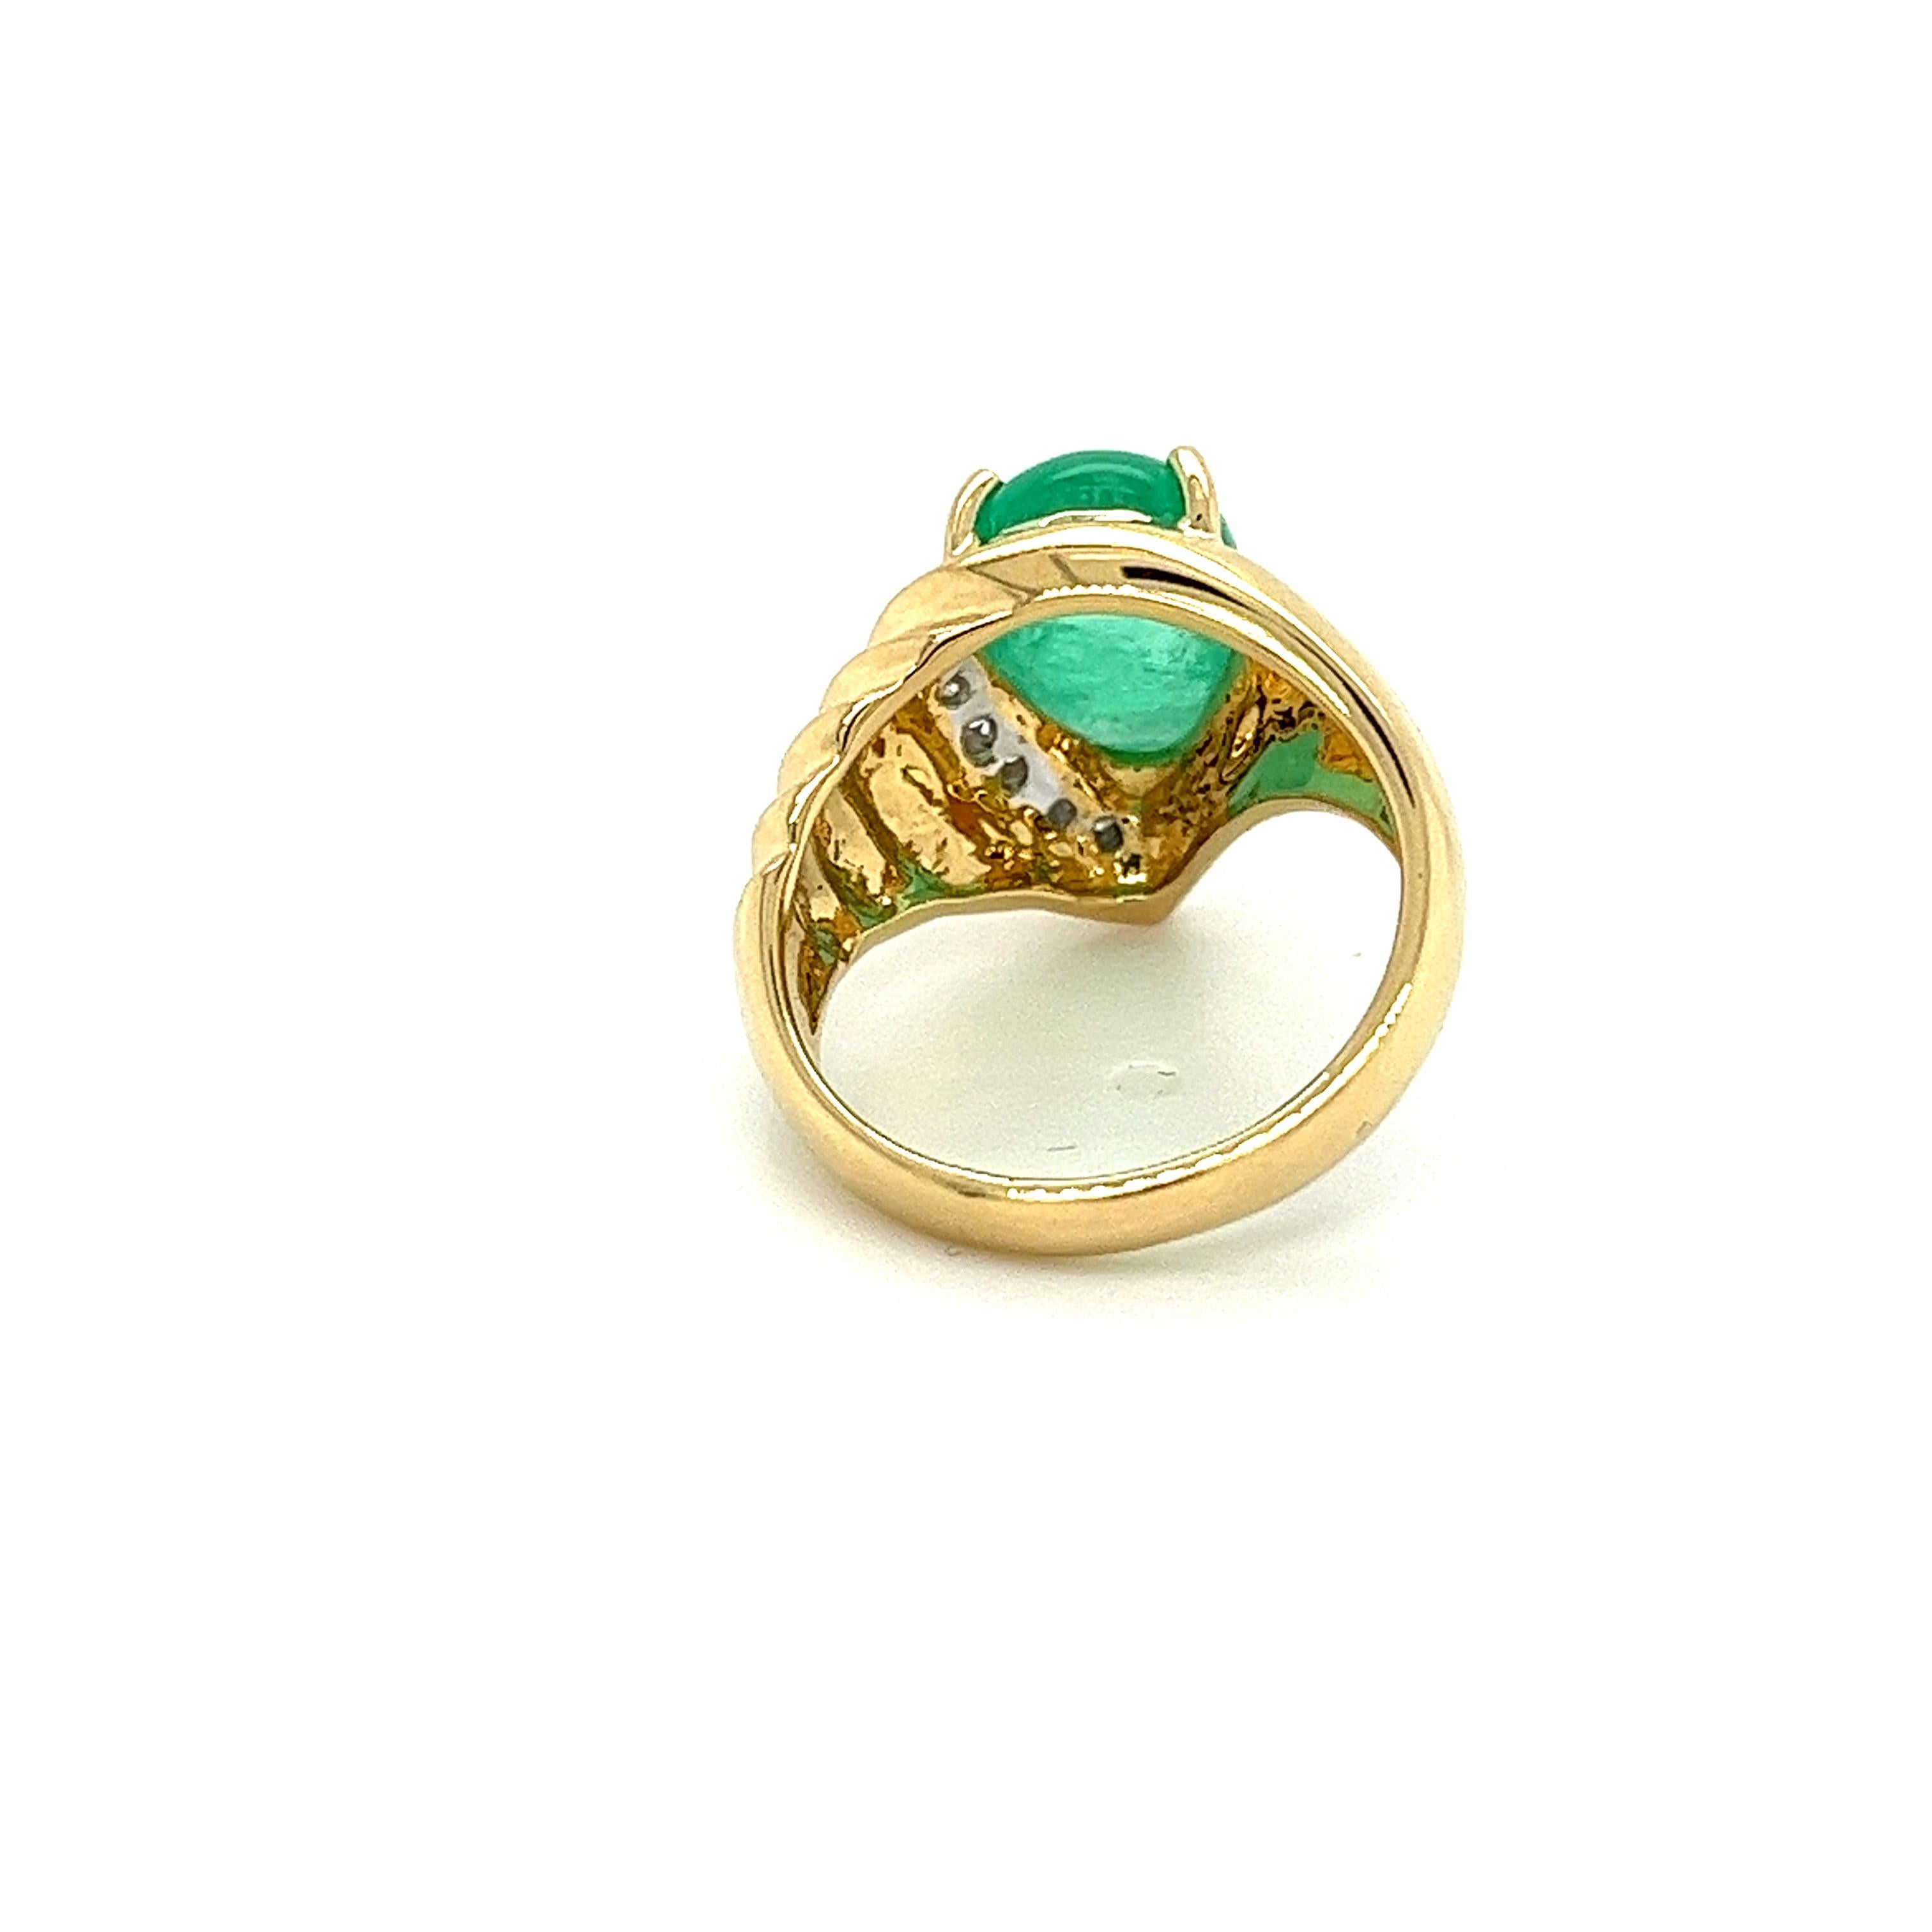 18K yellow gold ring featuring a7.81 carat pear shaped cabochon cut natural green emerald as the center stone. The 7.81 carat emerald showcases a beautiful green hue, and smooth cabochon cut. Adorned with 0.29 carats in round cut diamonds. This ring